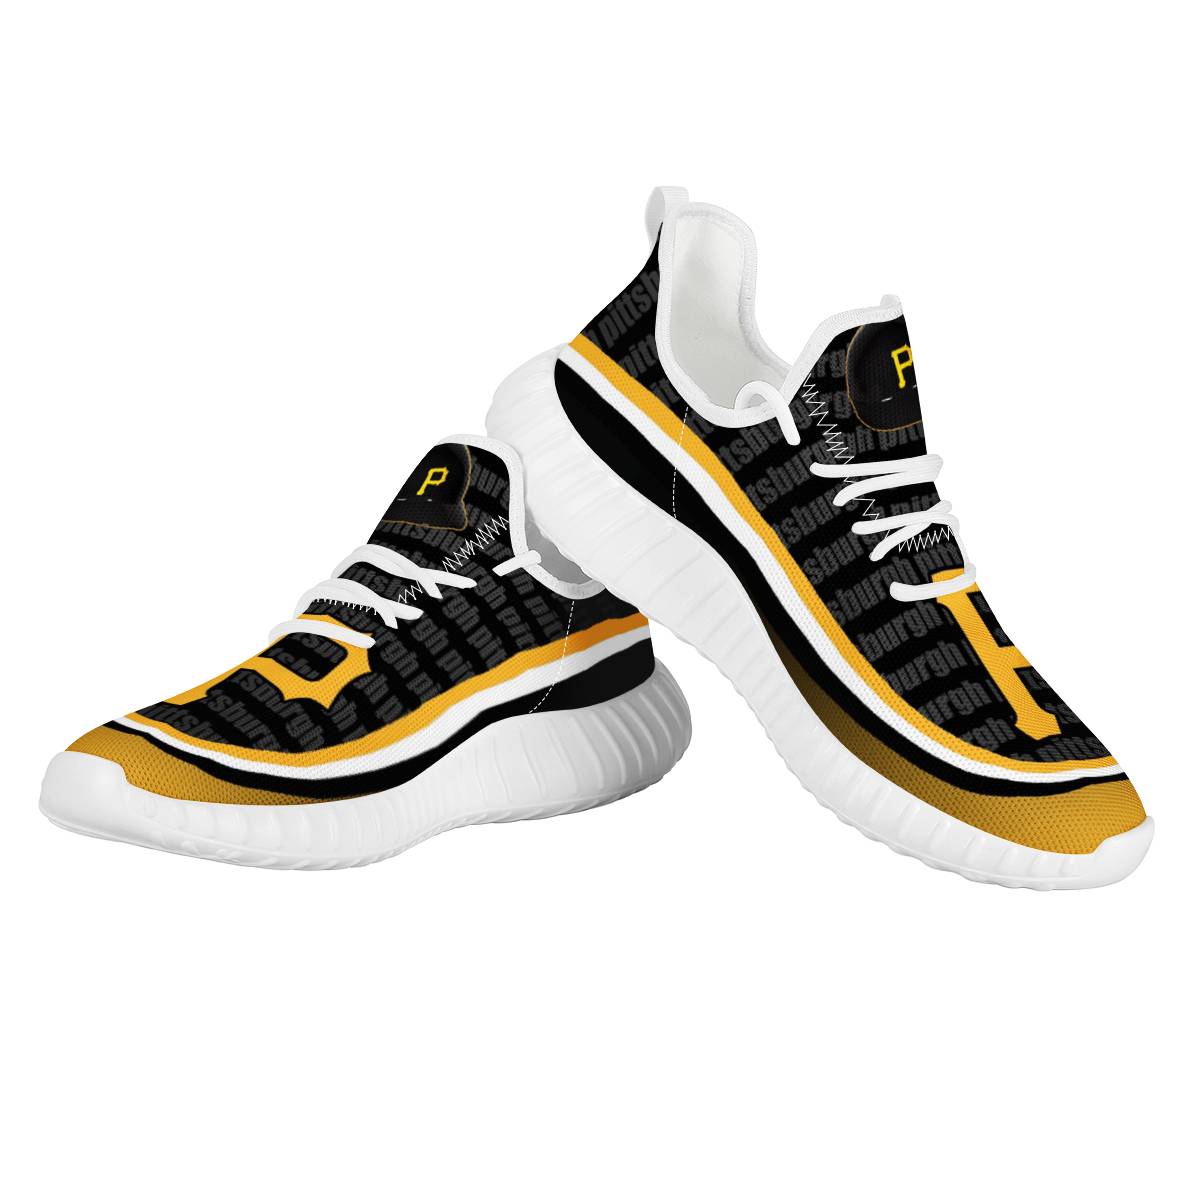 Pittsburgh Pirates shoes